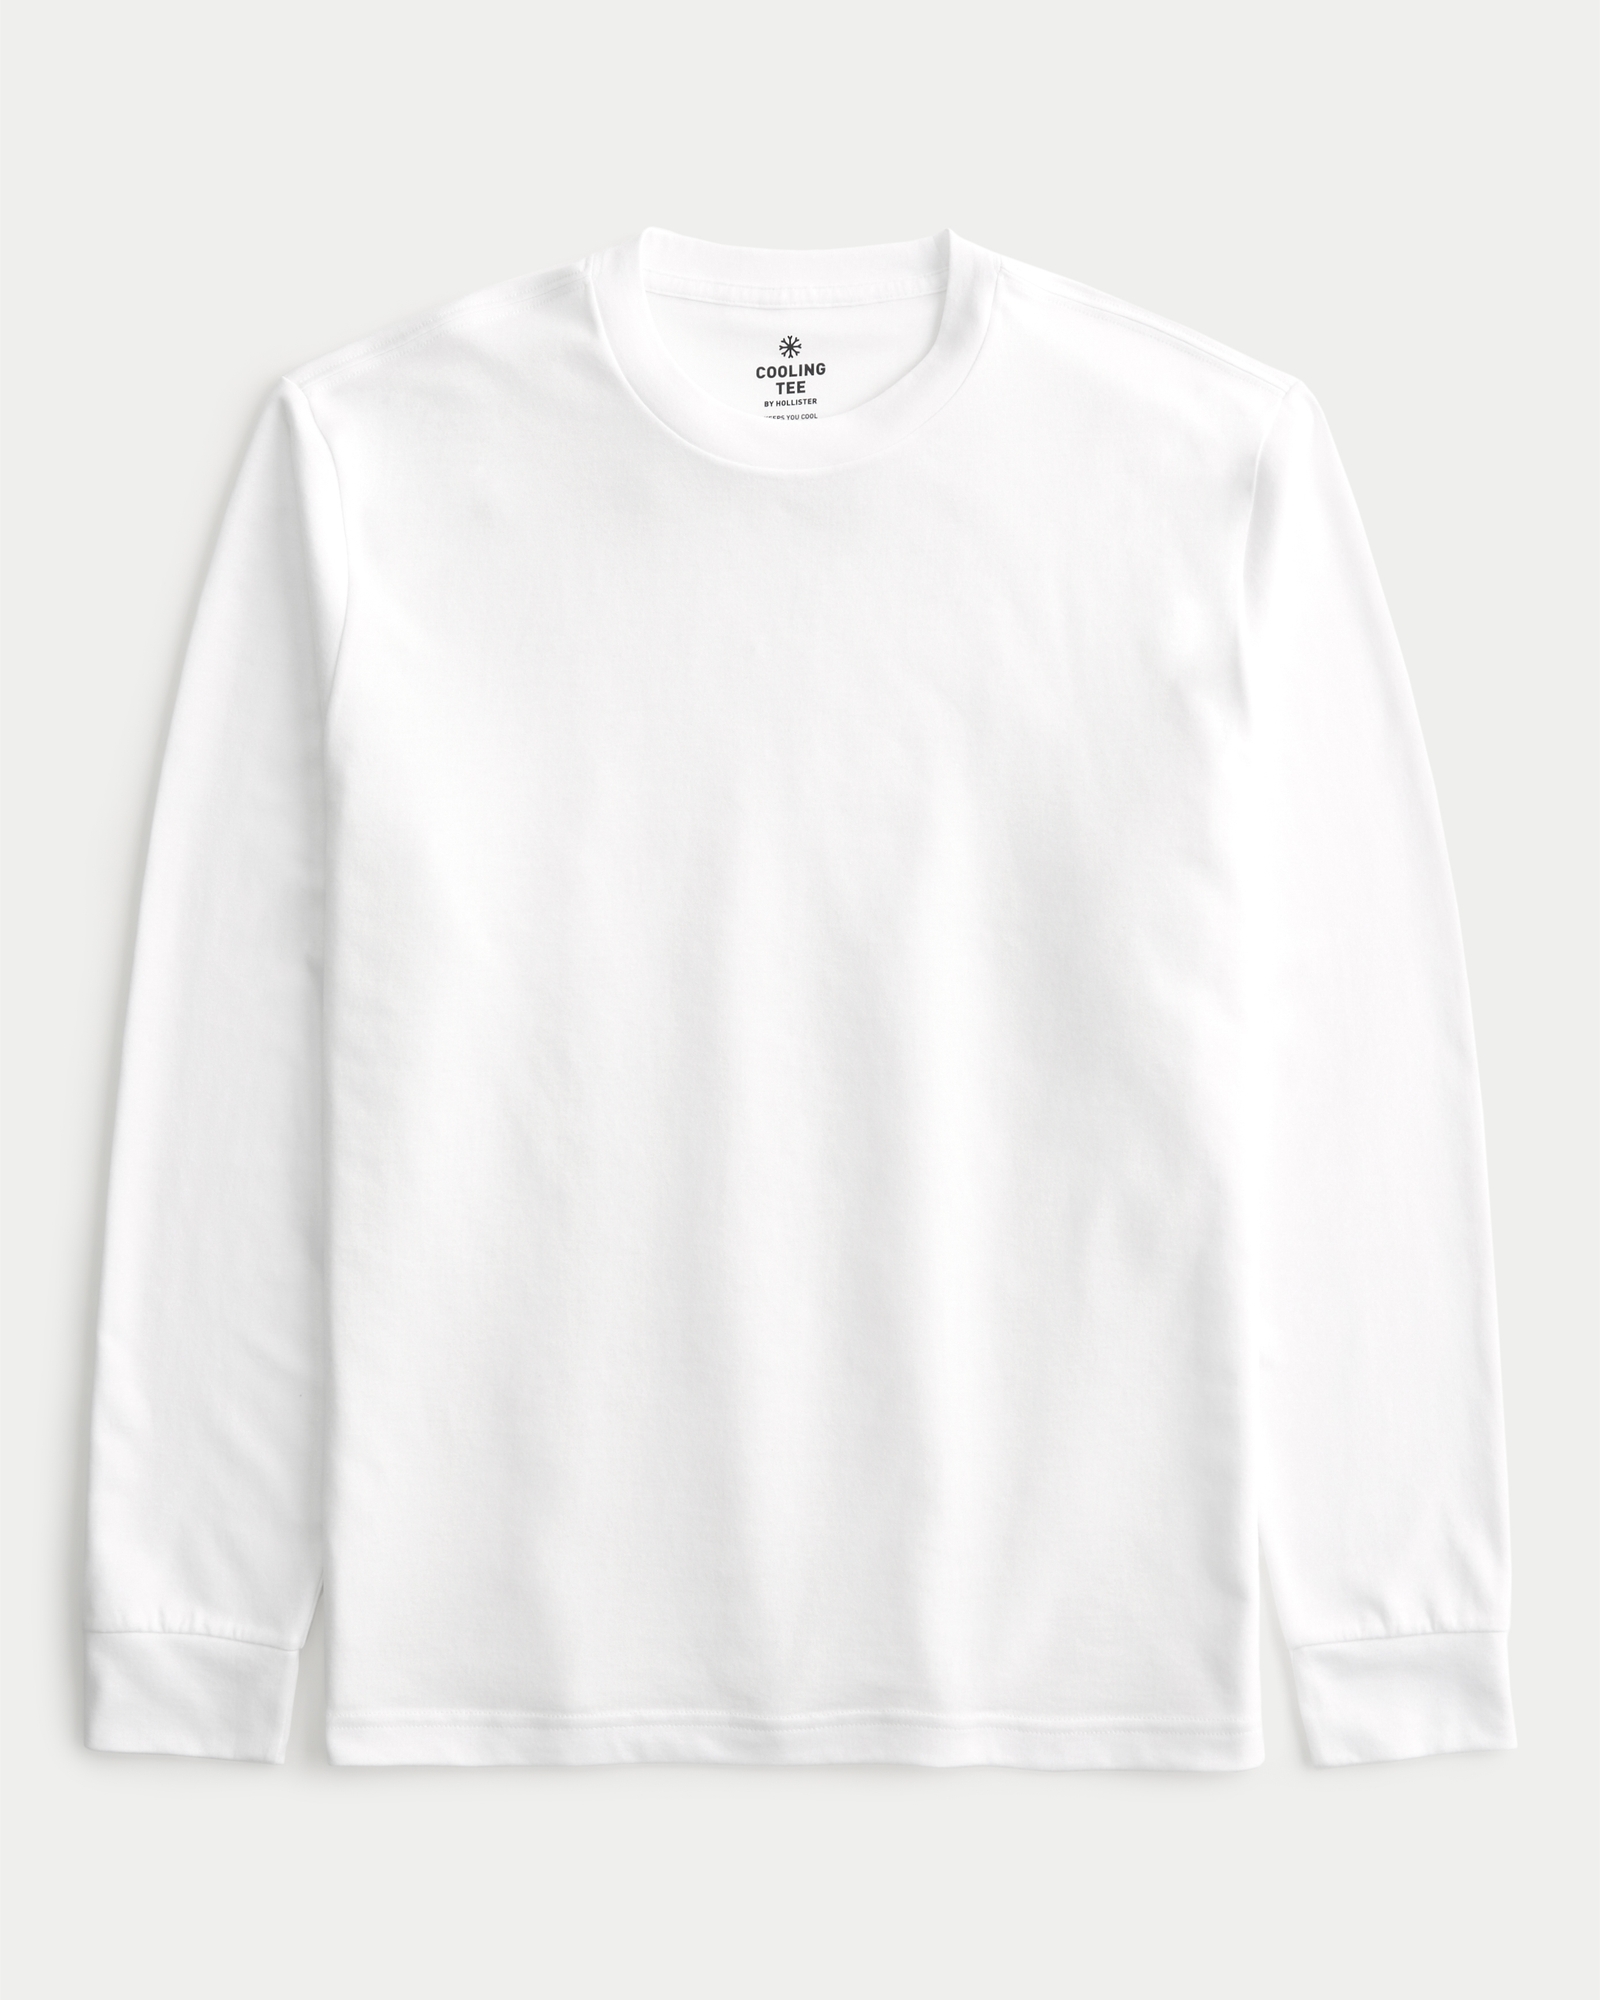 Men's Relaxed Long-Sleeve Cooling Tee, Men's Clearance